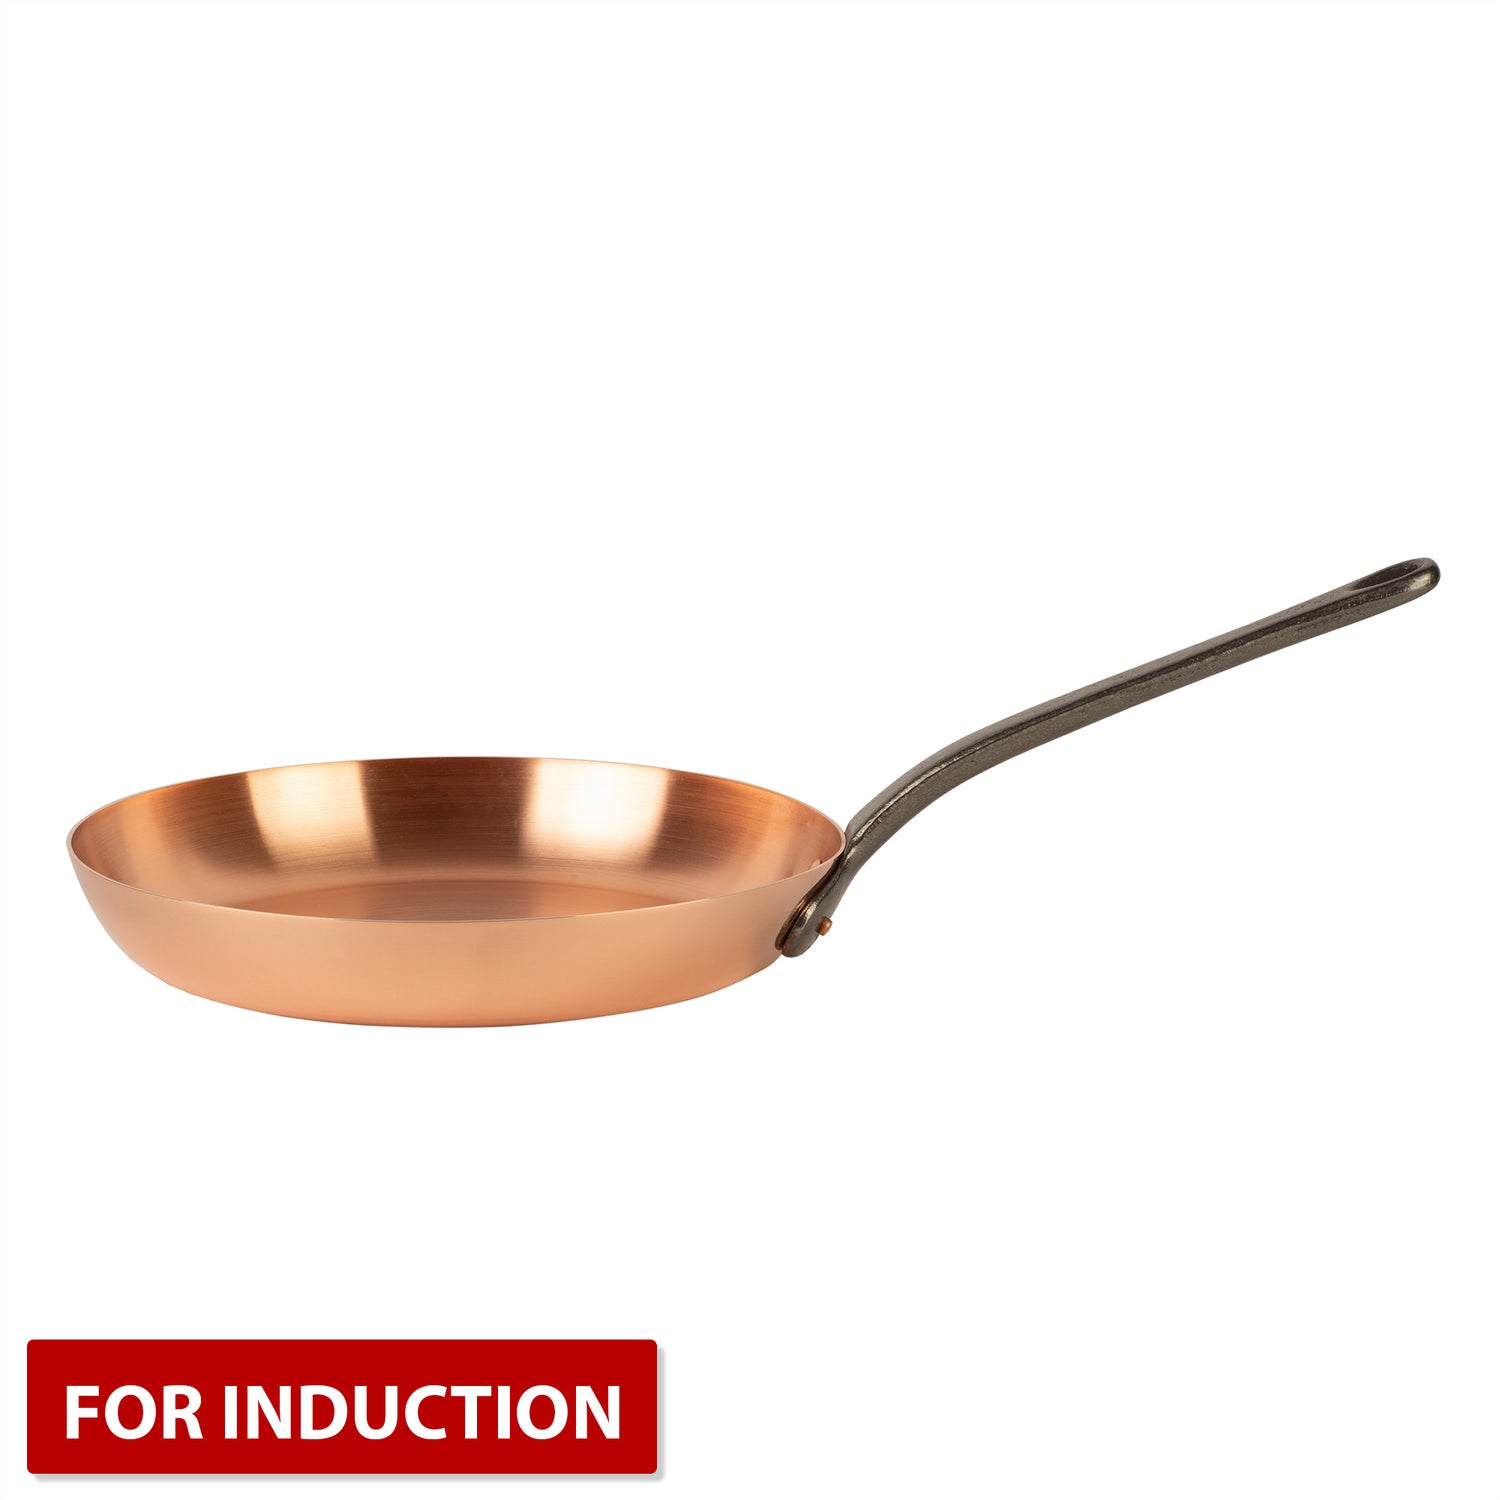 Copper cookware for induction cooktop